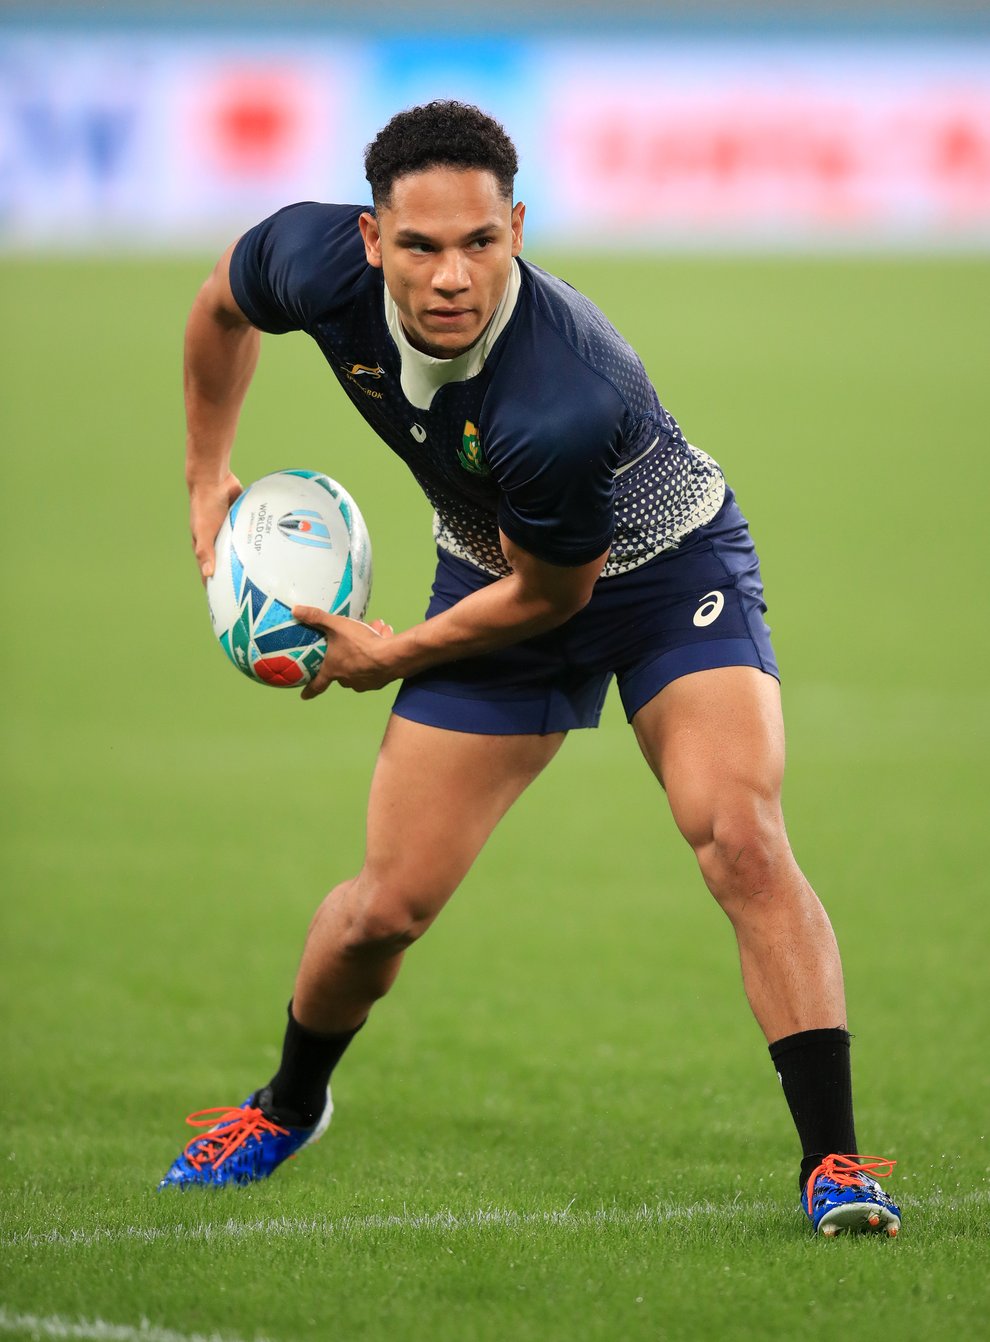 South Africa’s Herschel Jantjies has been cleared to train after initially testing positive for coronavirus on Sunday